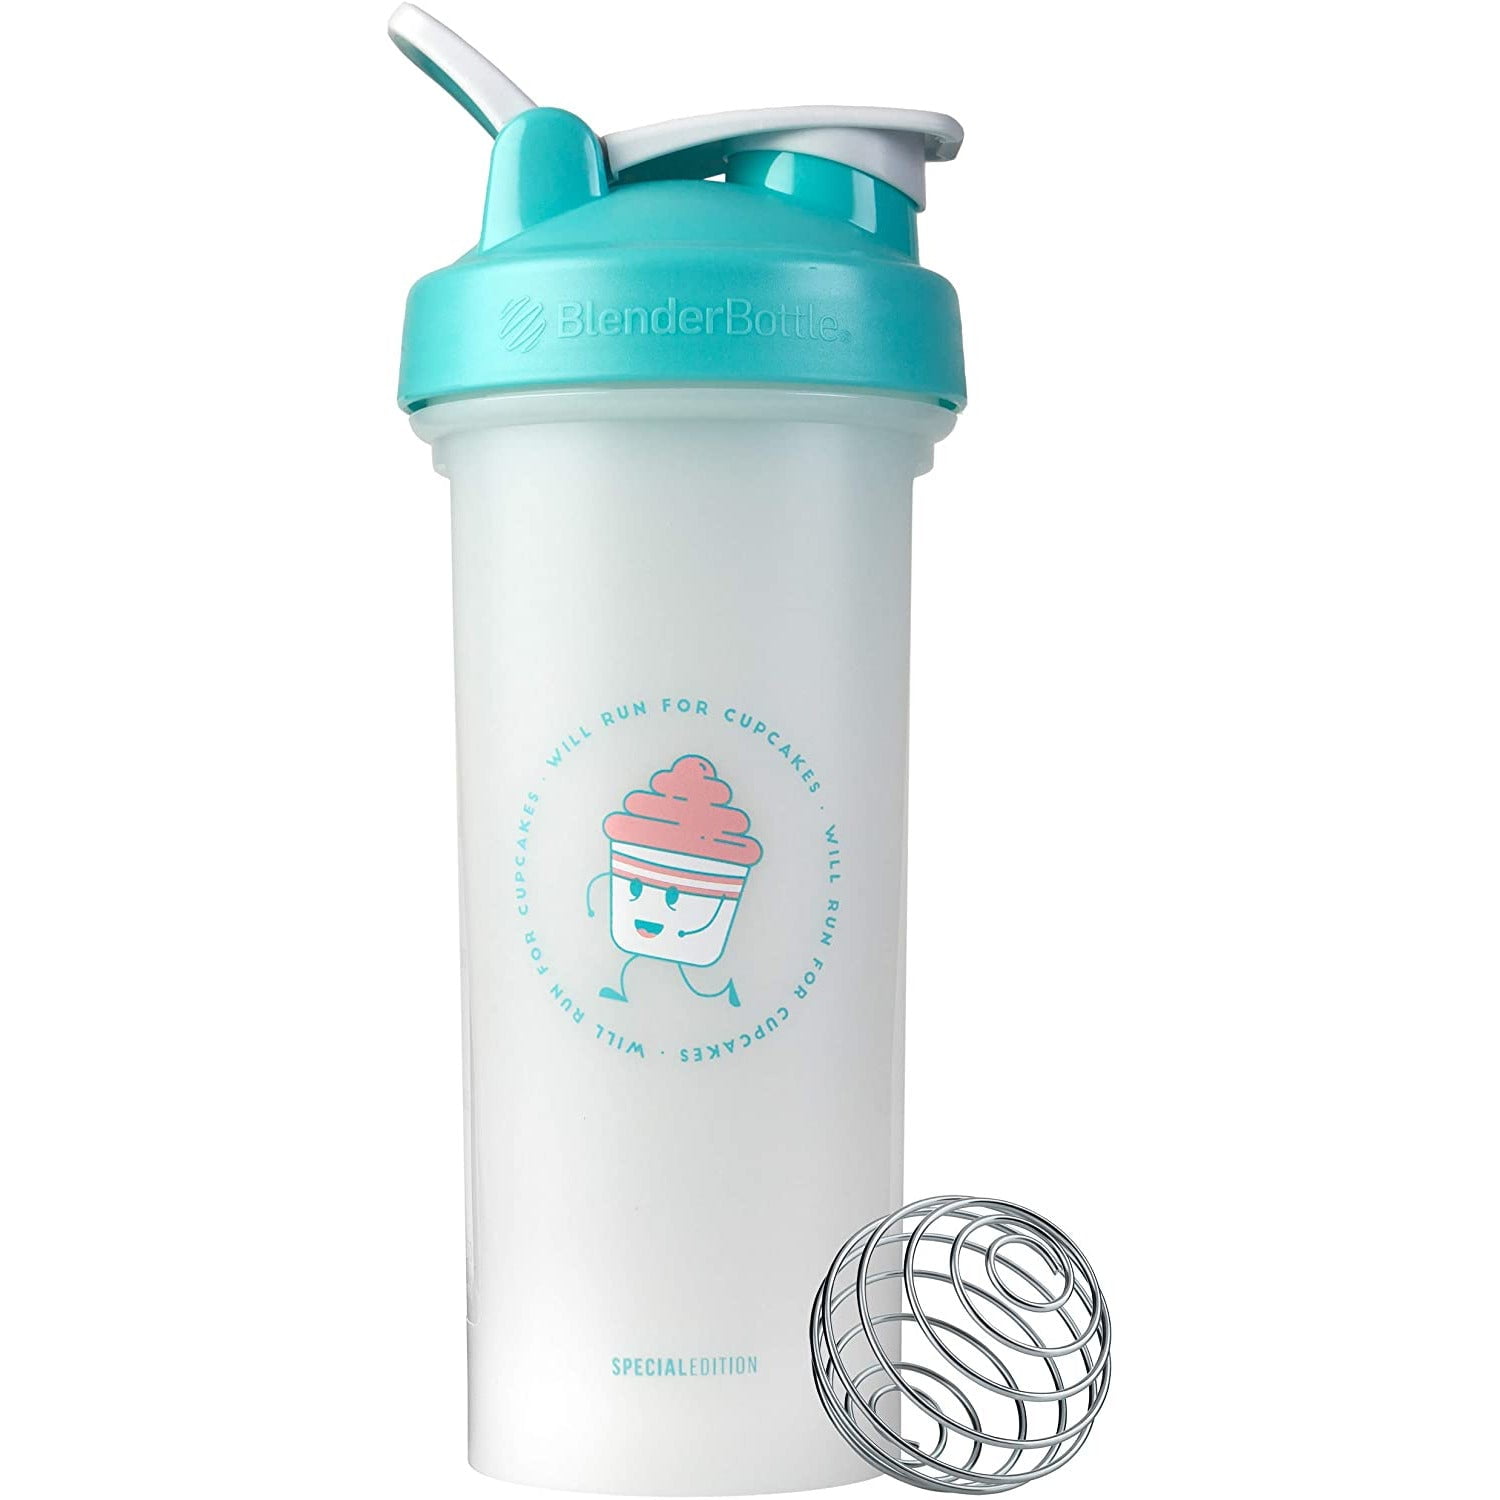 Ghost Blender Bottle 28oz Shaker Mix Cup with Loop Top - Purple Teal Great  Cond.